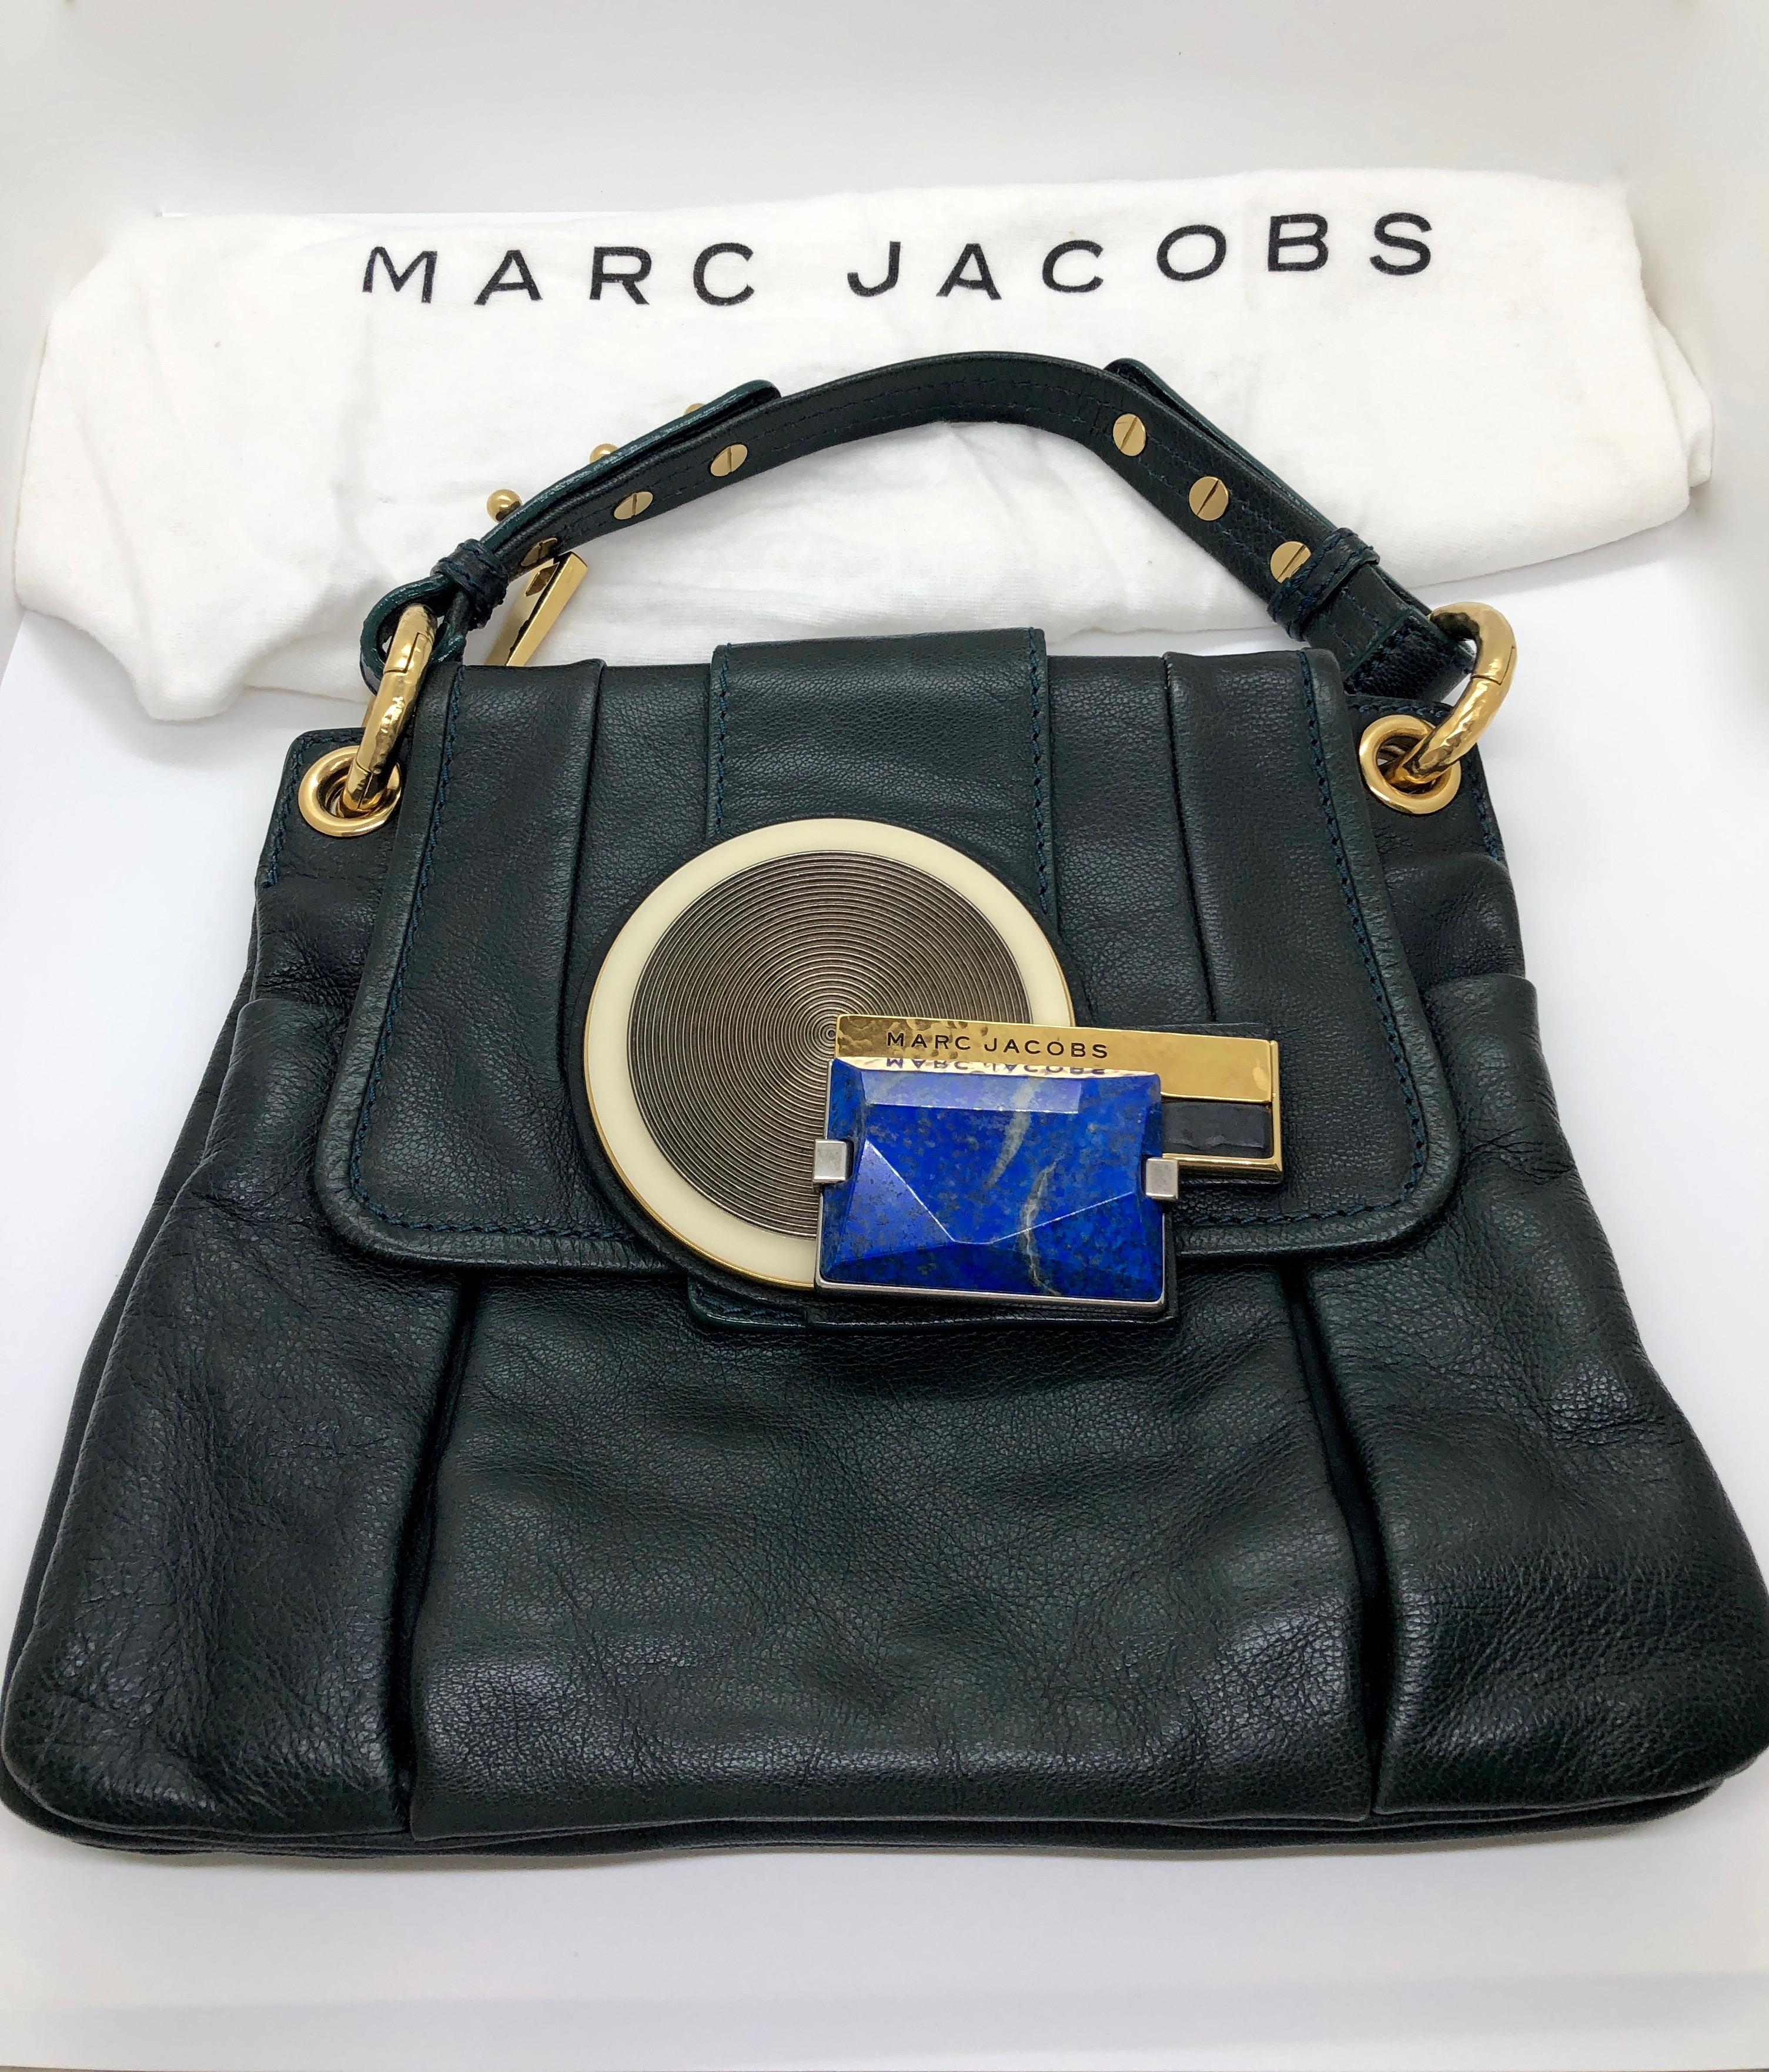 Marc Jacobs Green Leather Double Saddlebag w/ Top Handle & Metal / Jewel Accents 15